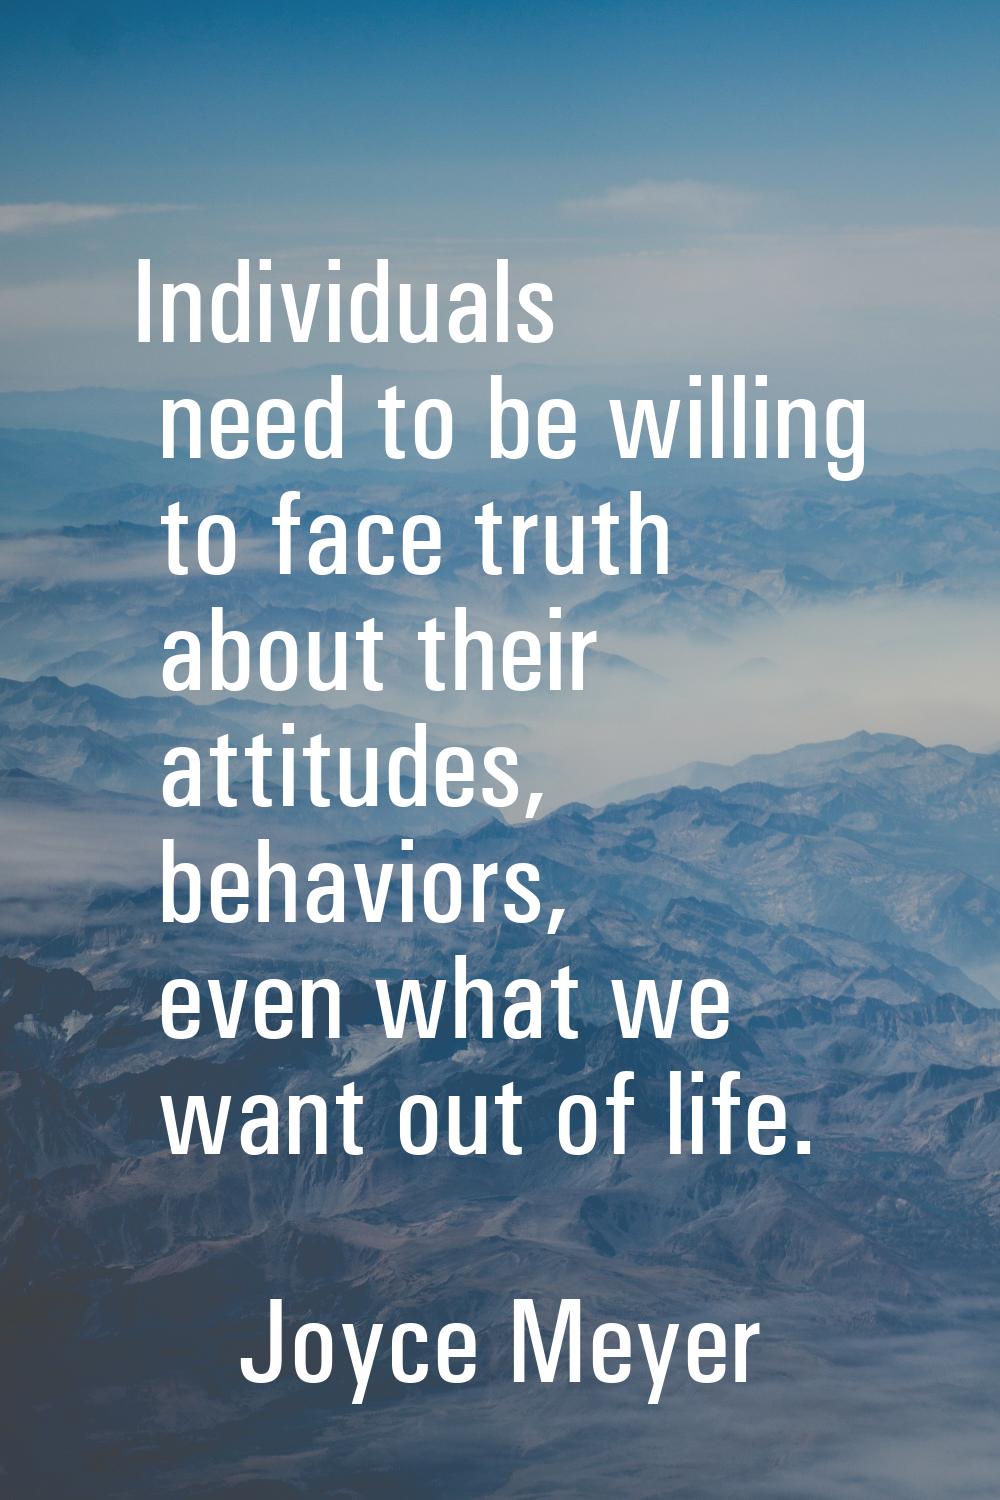 Individuals need to be willing to face truth about their attitudes, behaviors, even what we want ou